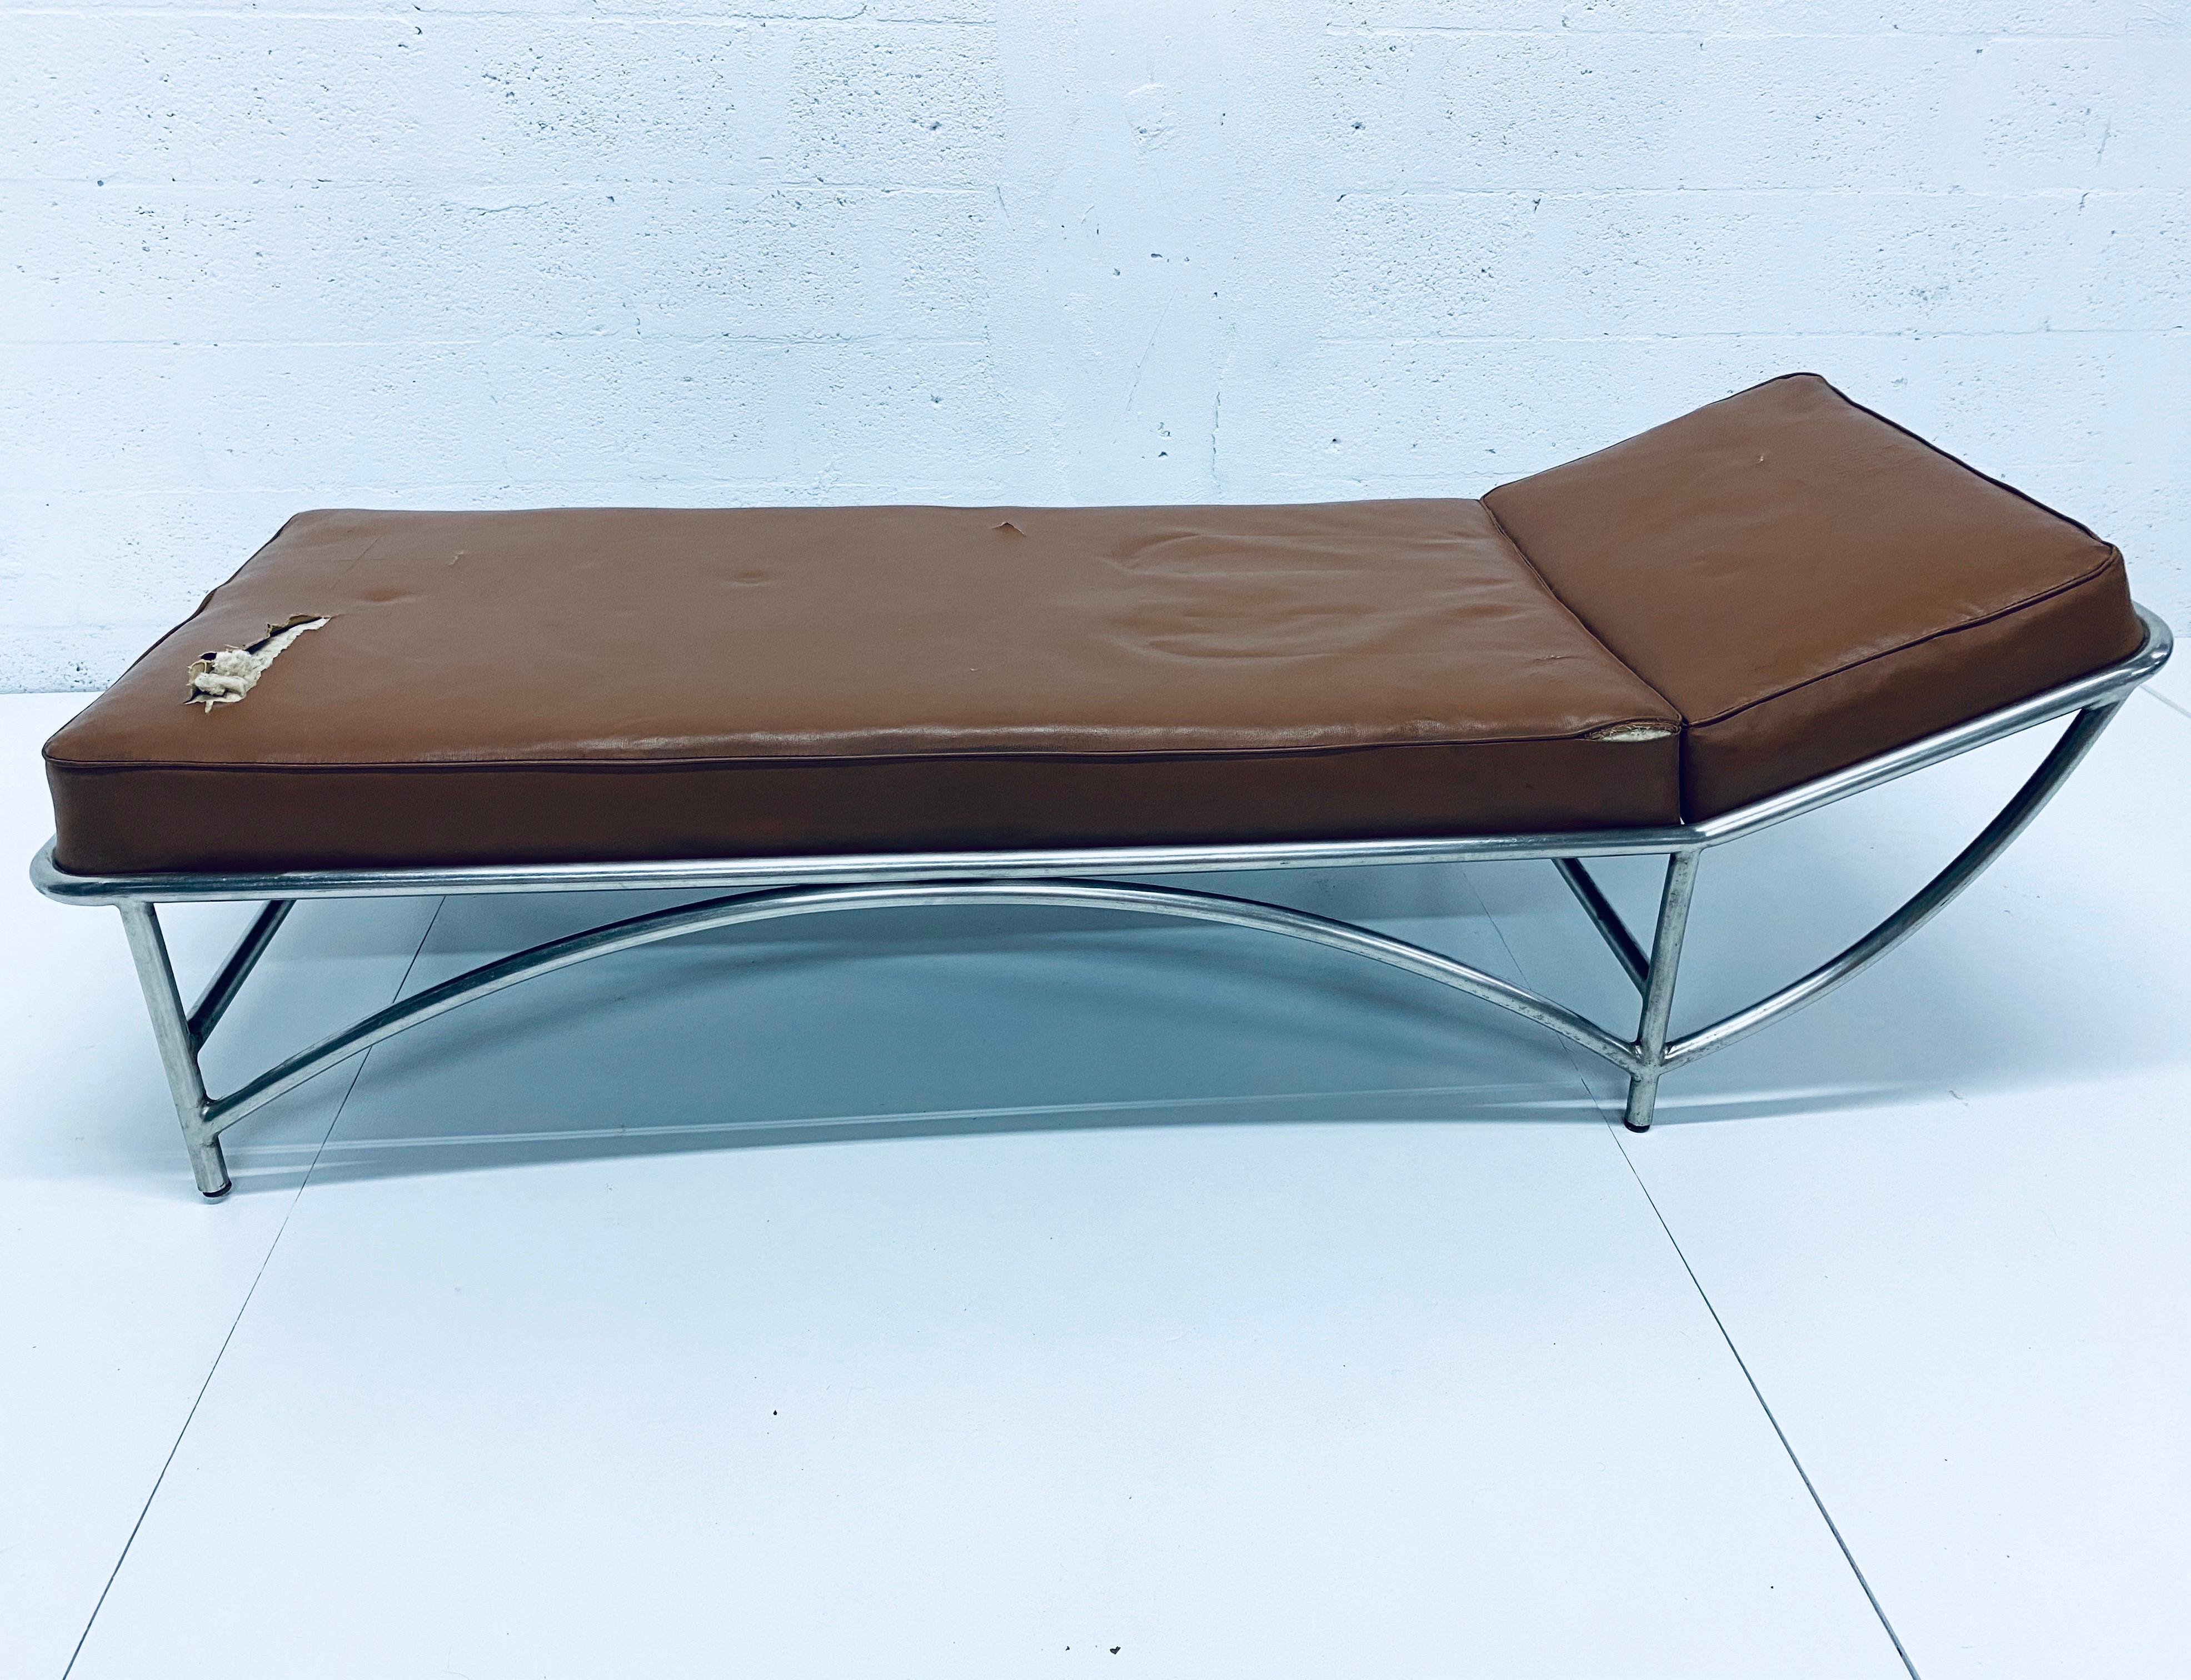 American Heywood Wakefield Art Deco Revival Tubular Steel Chaise Lounge, Daybed